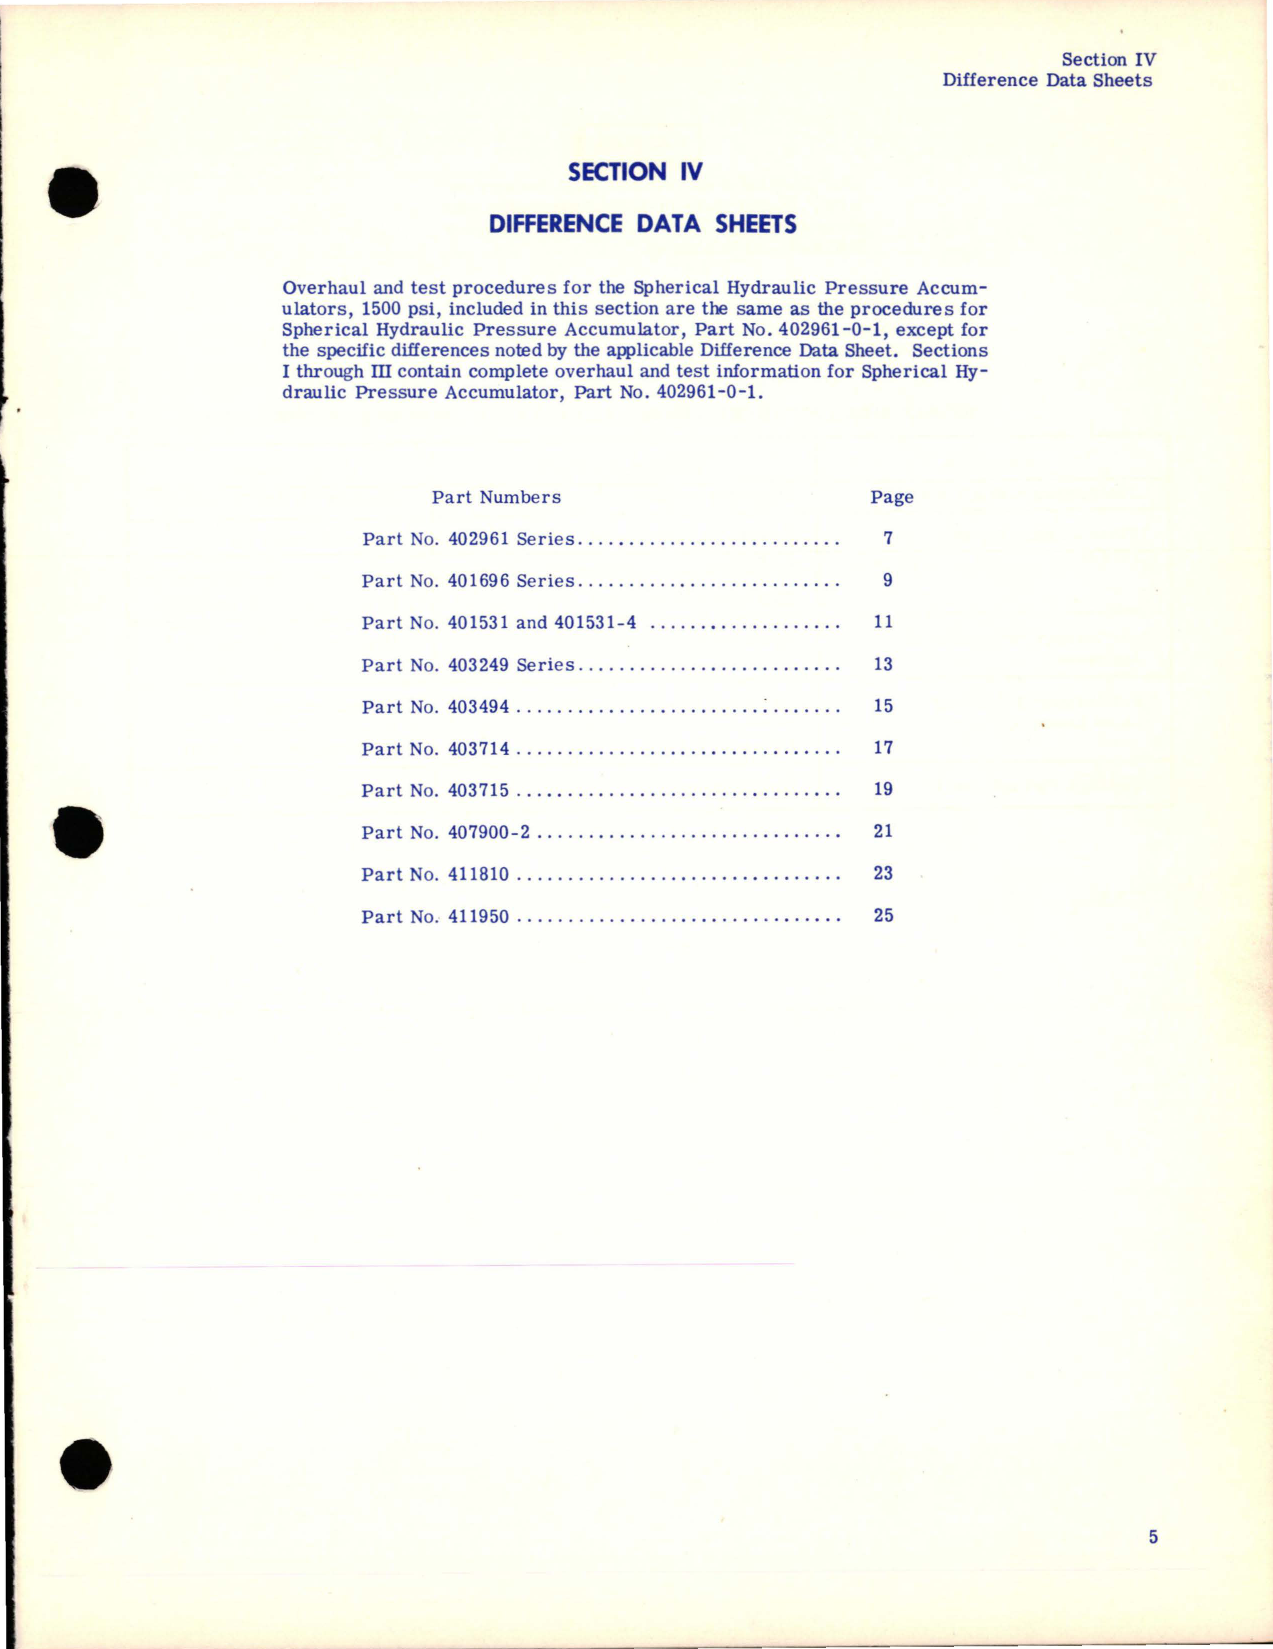 Sample page 7 from AirCorps Library document: Service Manual for Spherical Hydraulic Pressure Accumulators - 1500 PSI 